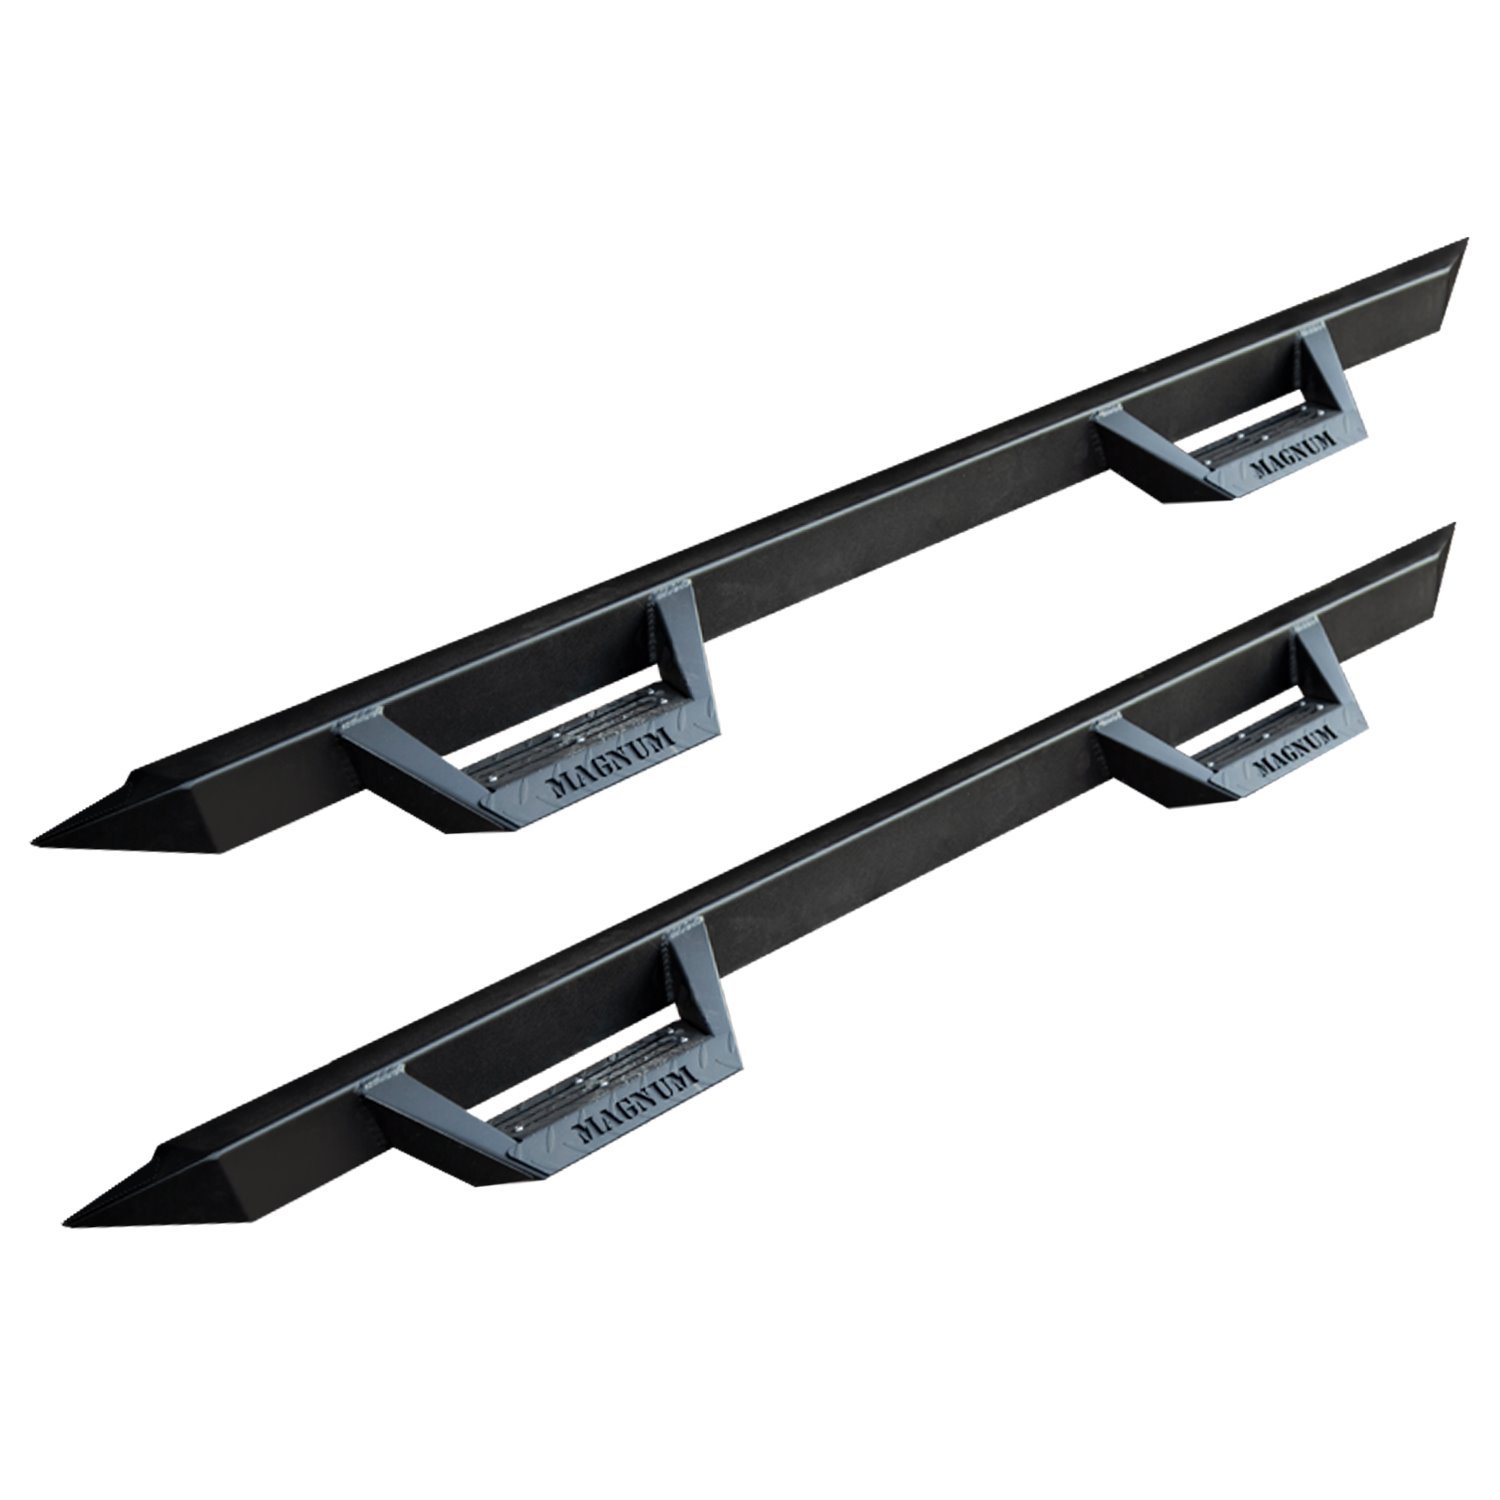 RTS25CH Magnum RT Drop Steps, Black Textured Alloy Steel, Fits Select Chevy Colorado/GMC Canyon Crew Cab